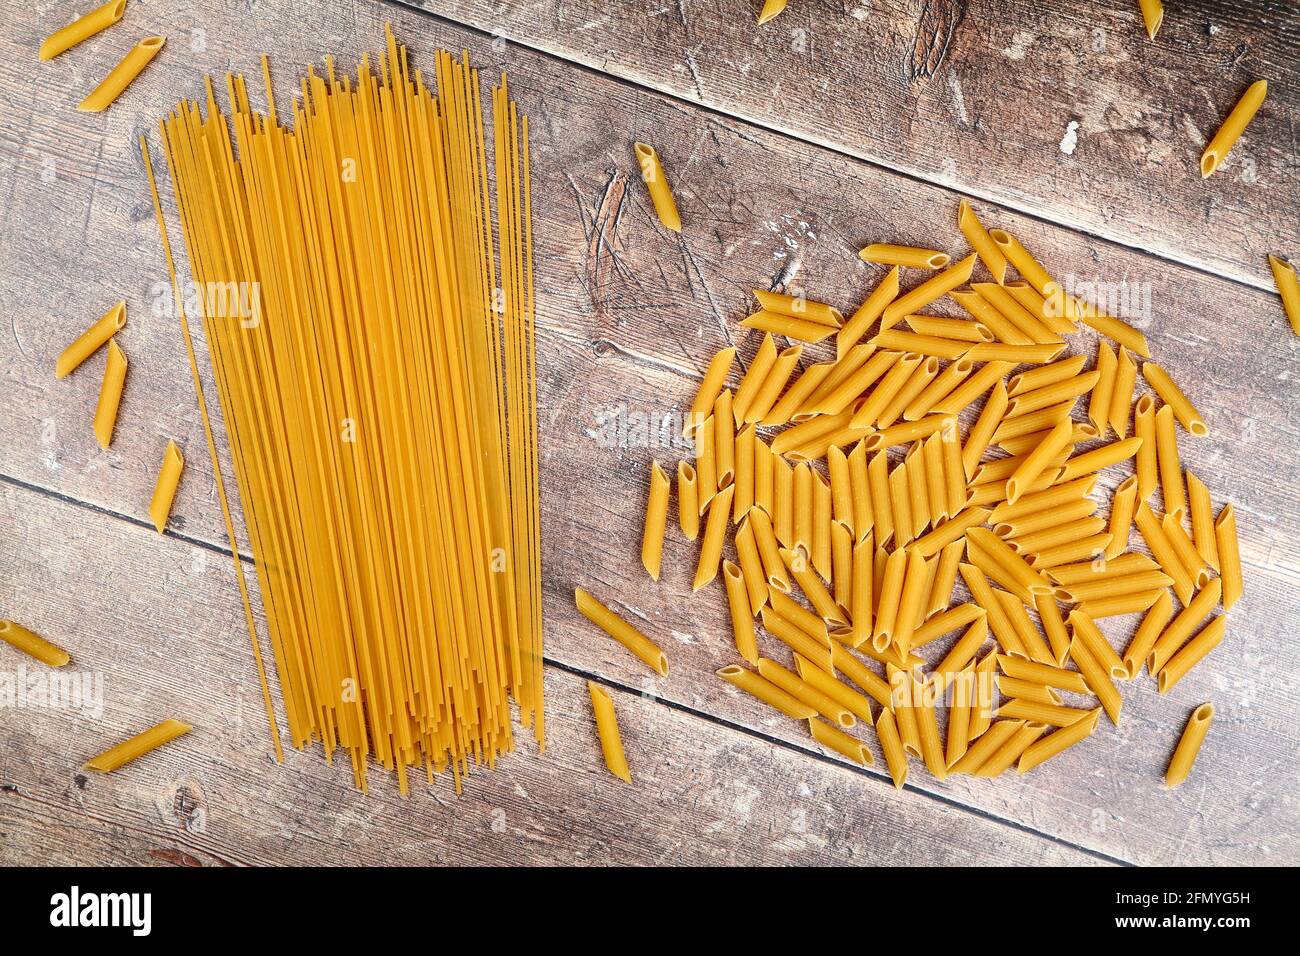 Flat lay overhead view of pasta shapes and spaghetti on a wooden table top Stock Photo